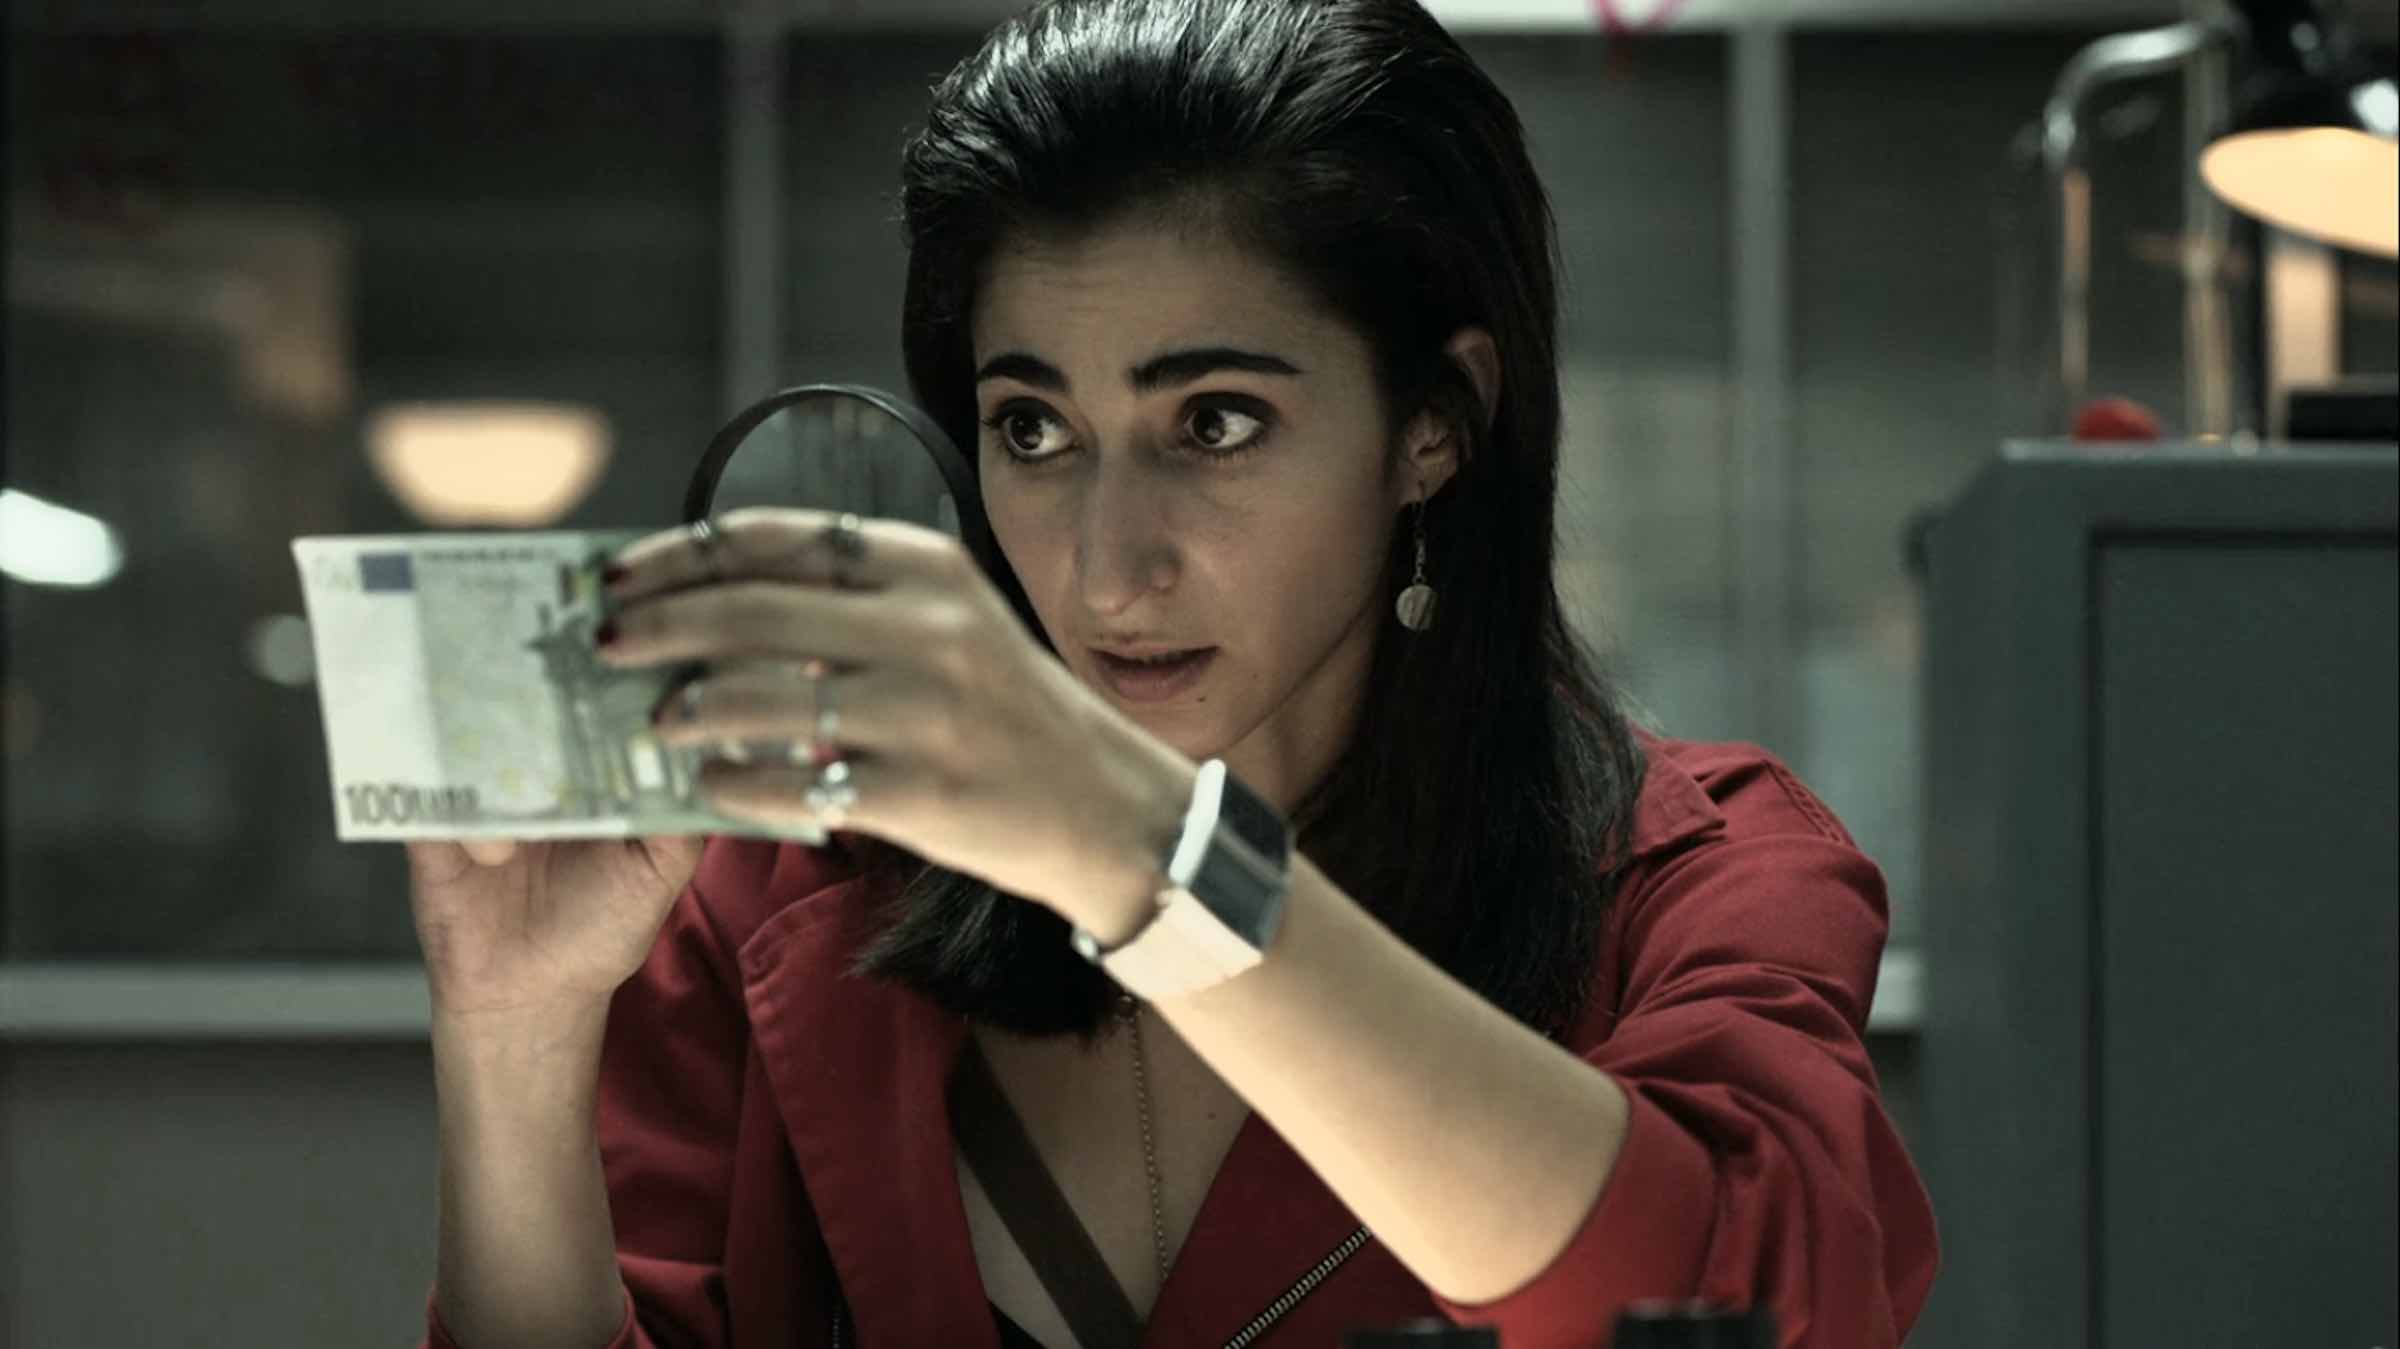 The hype around 'Money Heist' is real. We investigate whether or not Nairobi will stay alive in 'Money Heist' season 4. Here's what we know.